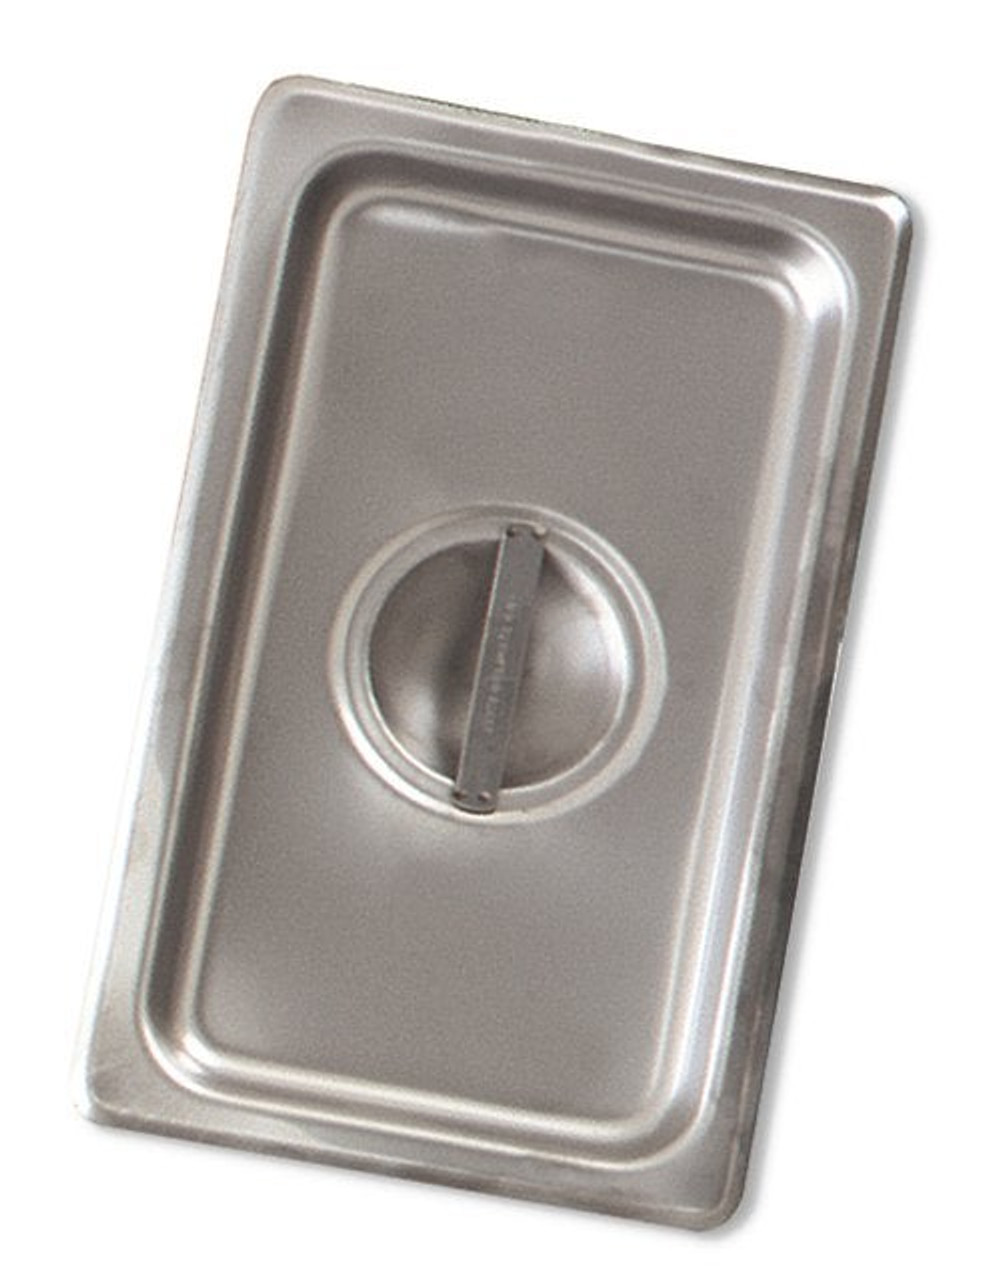 Browne & Co Full Size Stainless Steel Solid Pan Insert Cover | 1UN/Unit, 1 Unit/Case